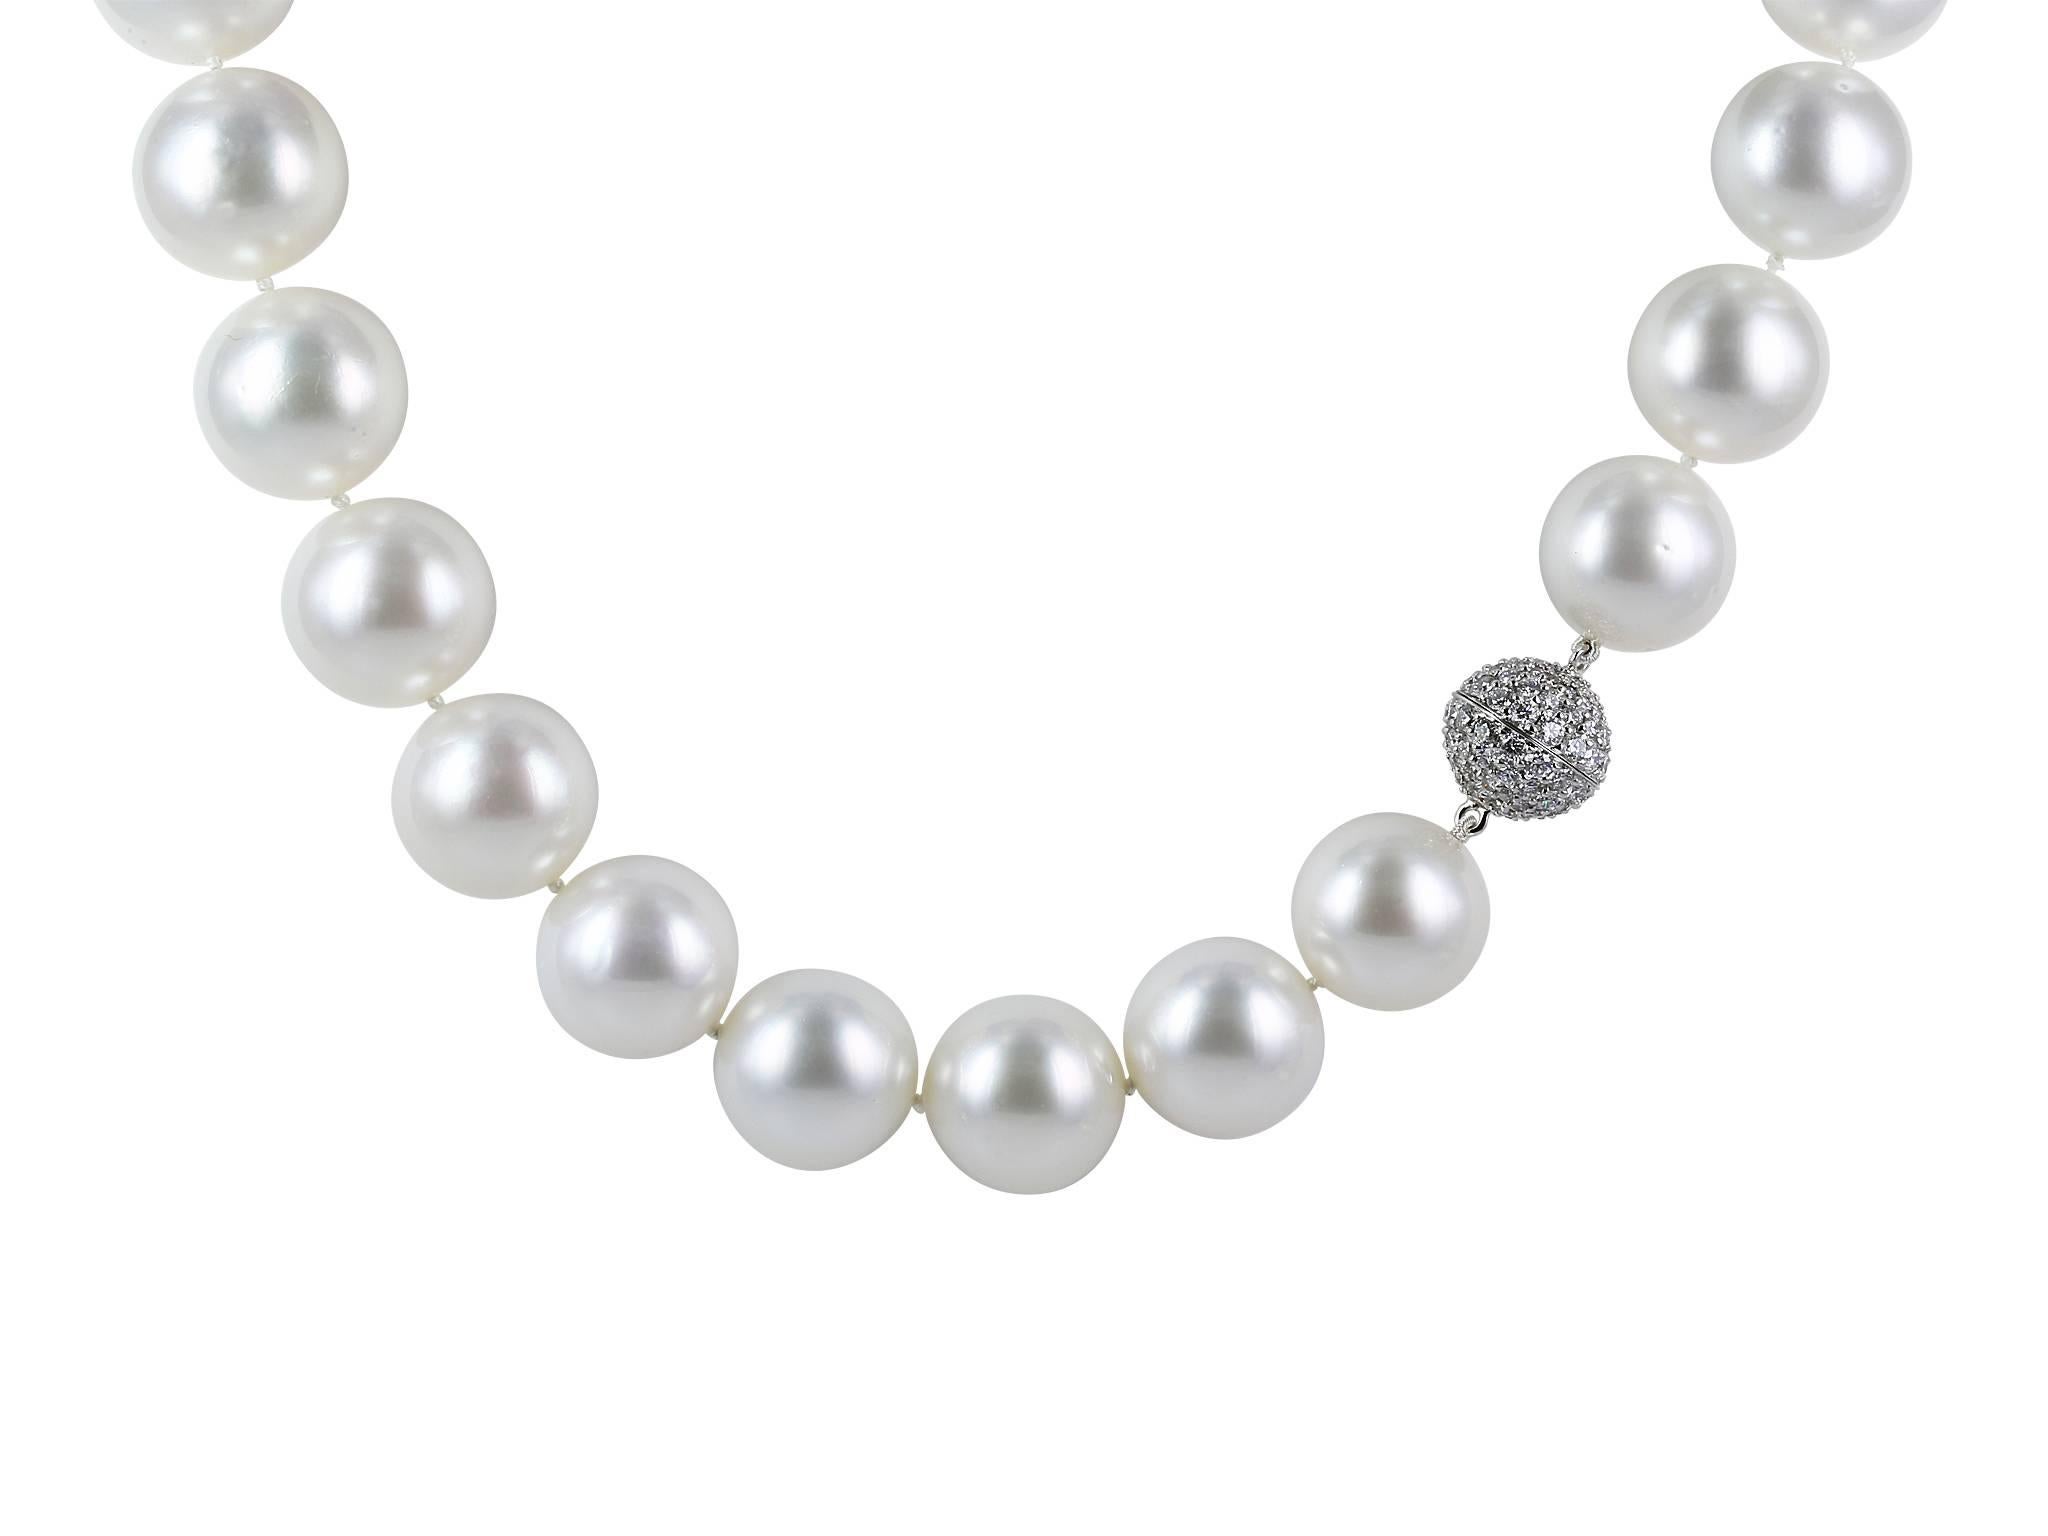 Nineteen inch pearl necklace consisting of twenty-seven 15-18 millimeter South Sea Pearls strung with an 18 karat white gold ball clasp set with approximately one carat of round brilliant cut white diamonds. 